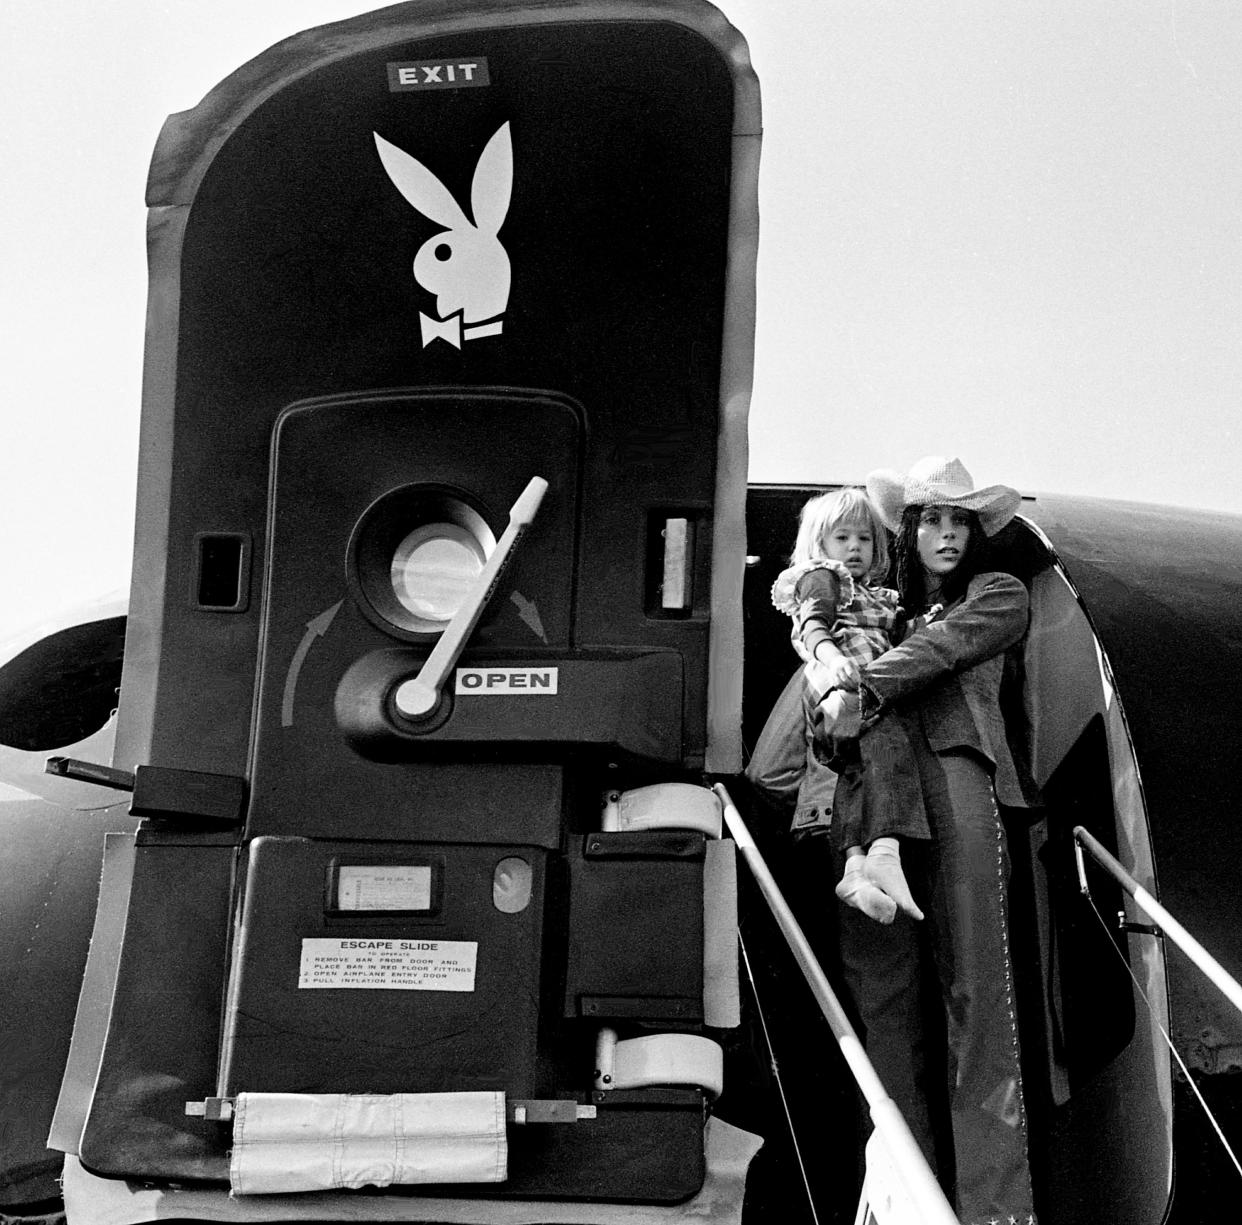 Cher, with 3-year-old daughter, Chastity, exits Hugh Hefner's luxurious Playboy jetliner, appropriately dubbed "The Big Bunny," at Berry Field April 14, 1973. Sonny and Cher are in town for a "sold out" concert at the Municipal Auditorium.